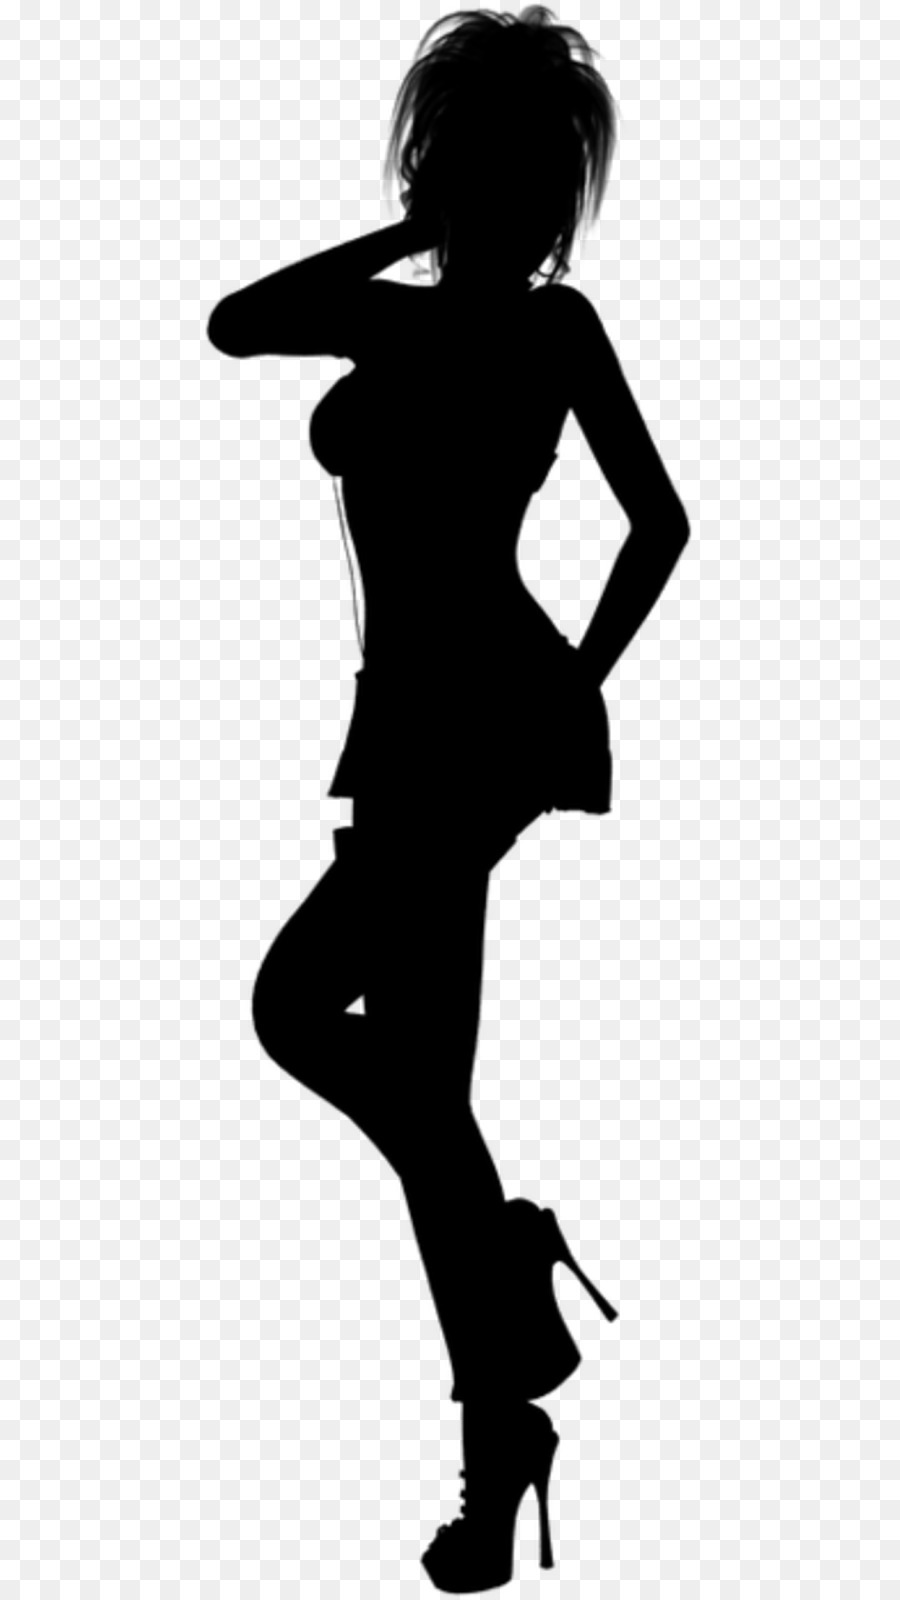 Silhouette Shadow Drawing Clip art - Silhouette png download - 495*1600 - Free Transparent Silhouette png Download.